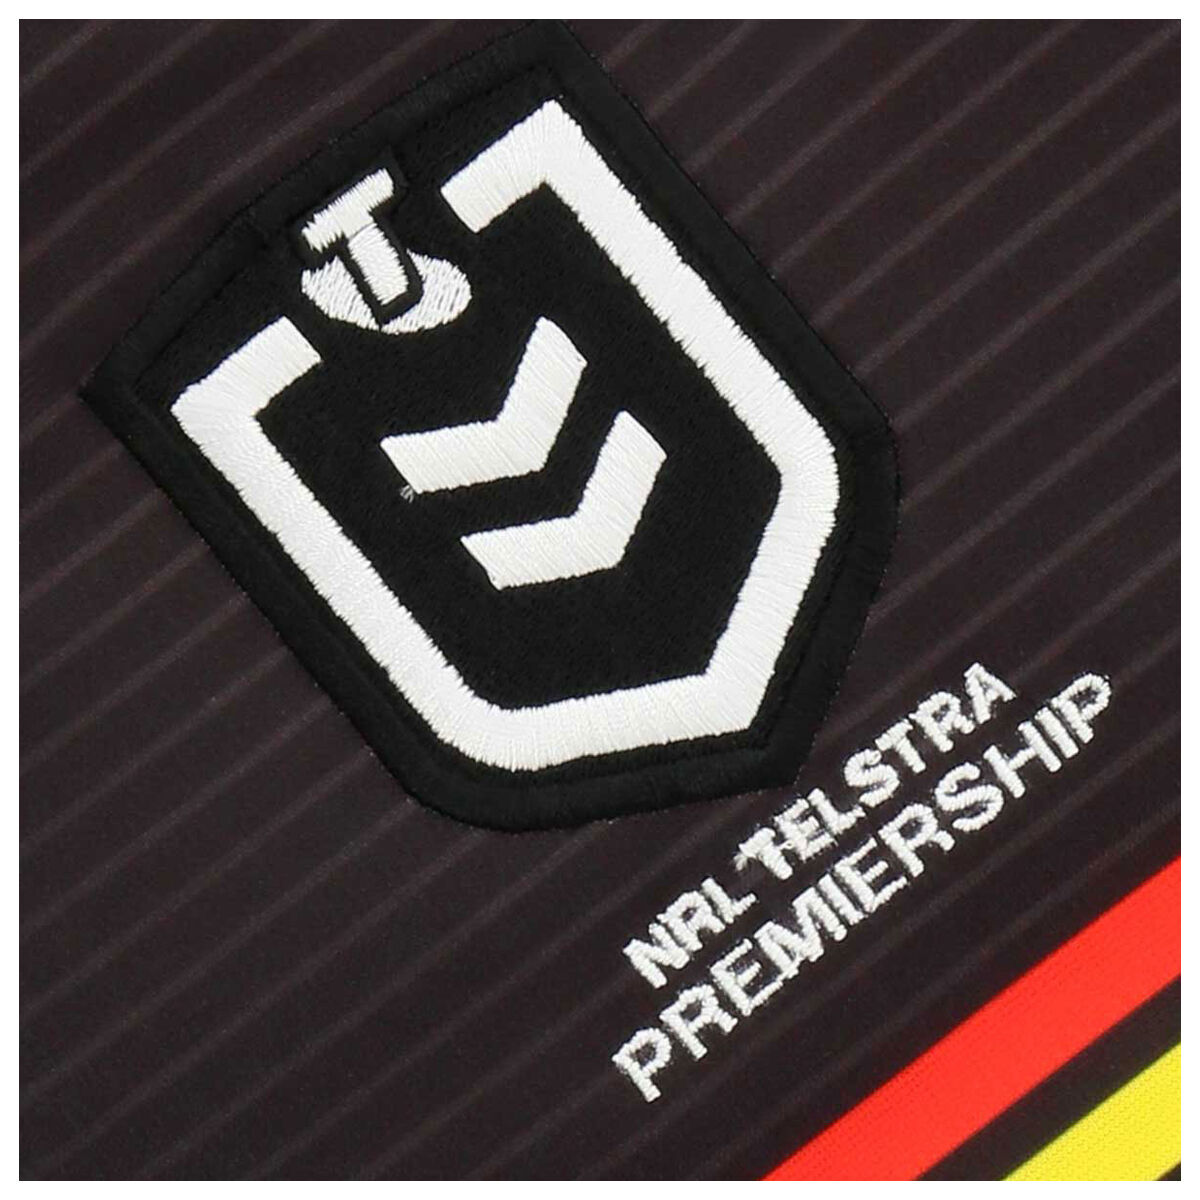 Penrith Panthers Mens 2023 Replica Home Jersey